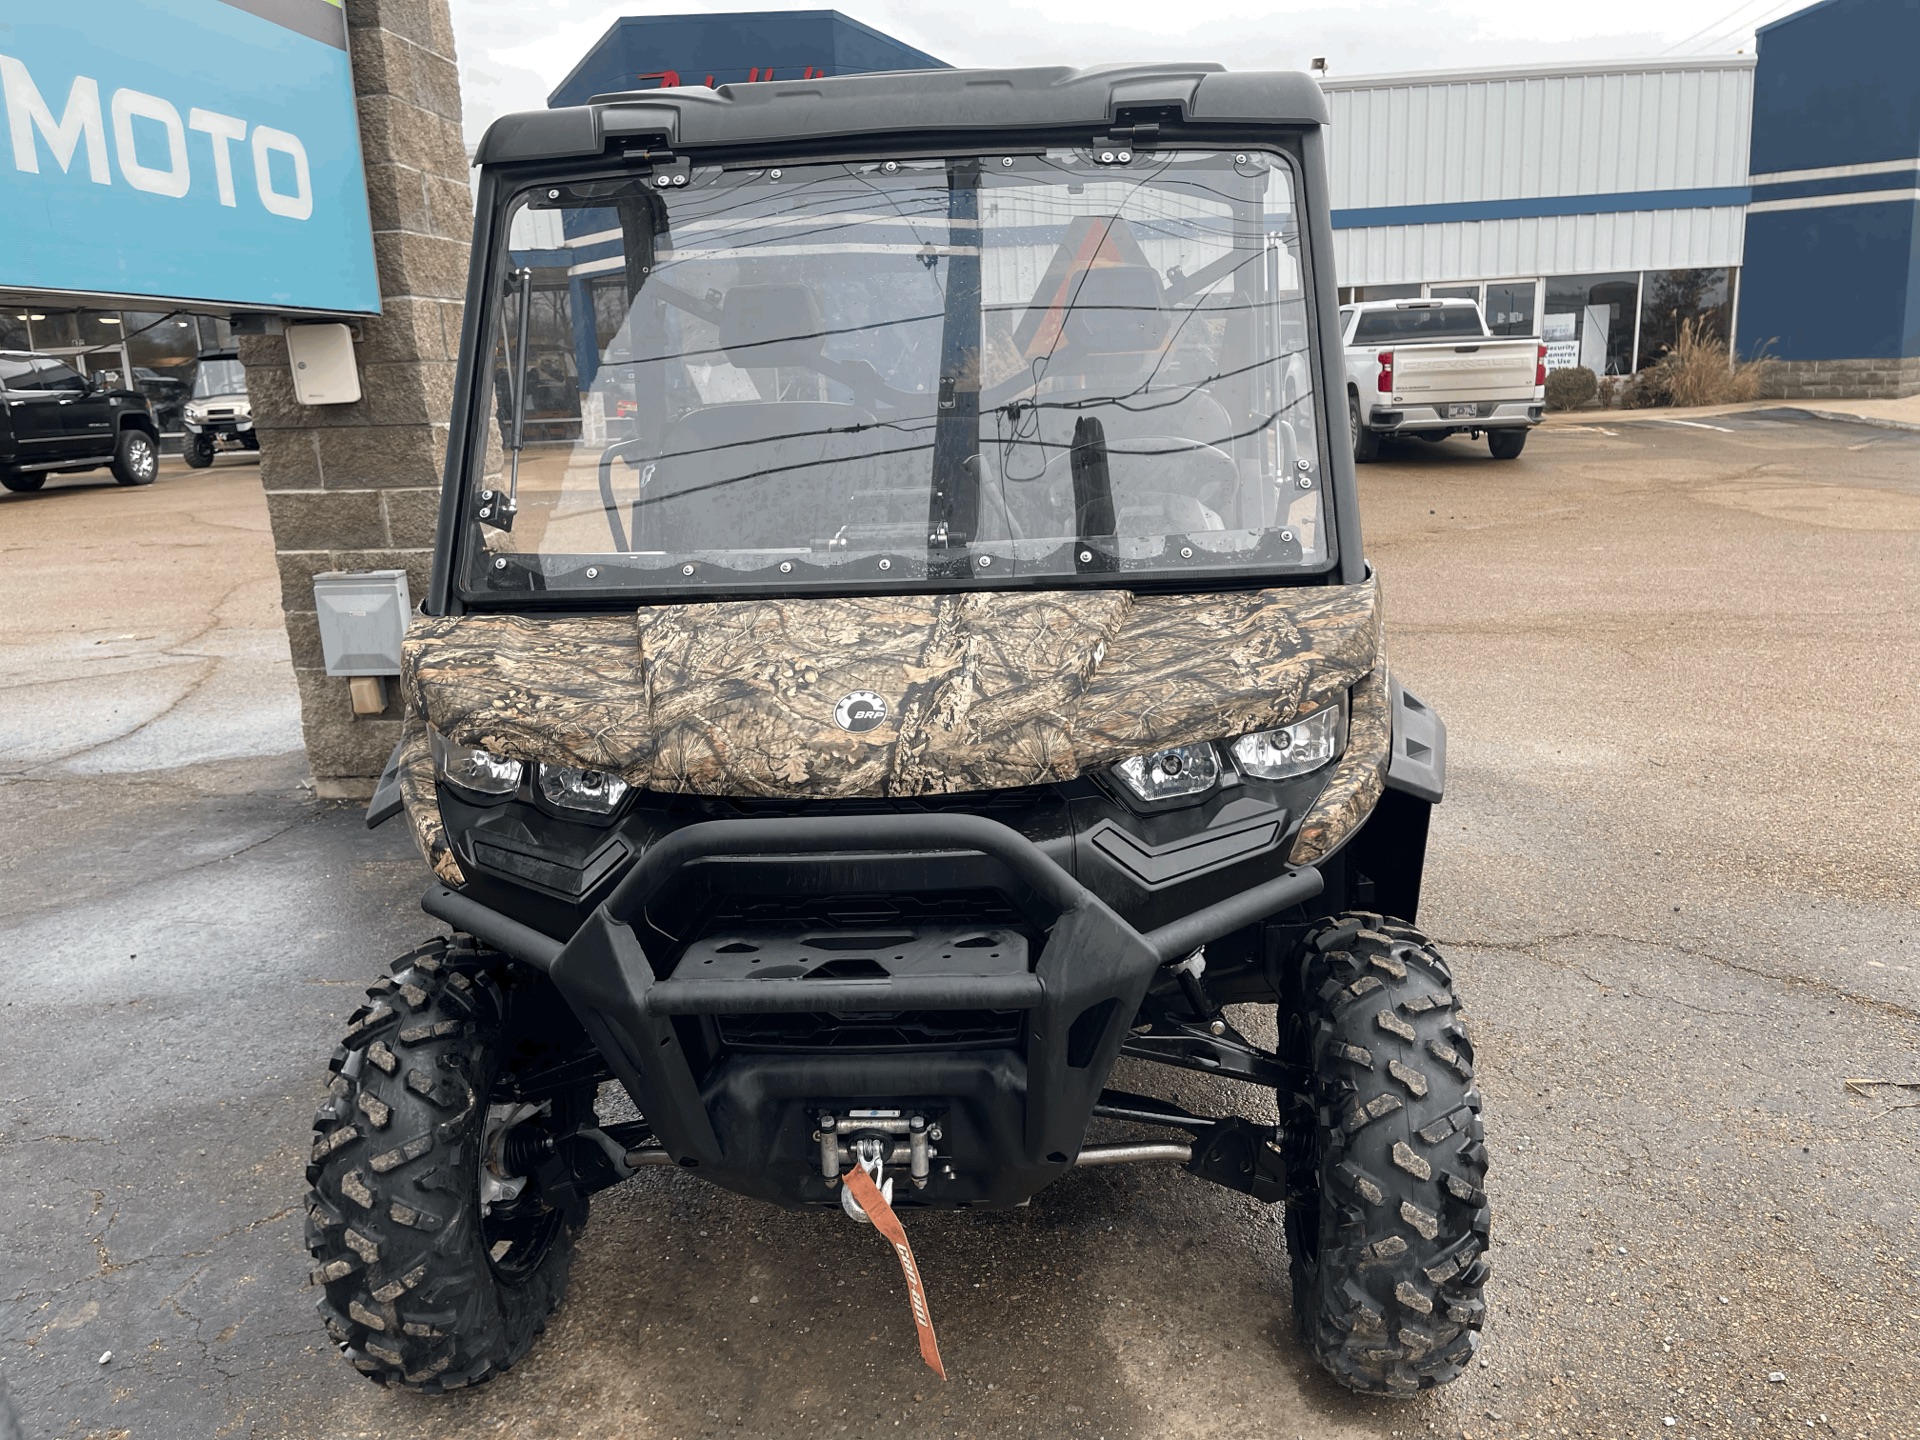 2020 Can-Am Defender XT HD10 in Dyersburg, Tennessee - Photo 11